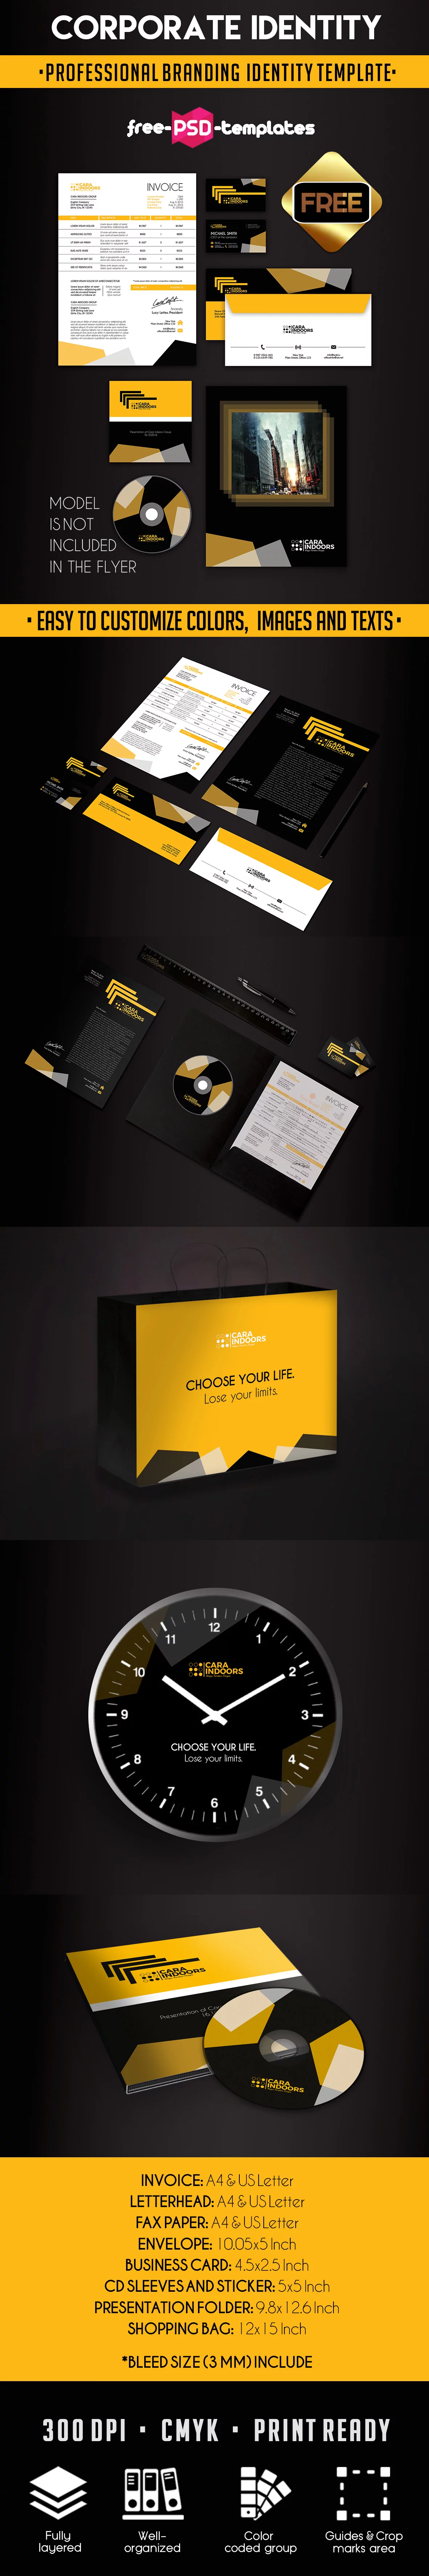 Bigpreview_corporate-identity-free-psd-templates